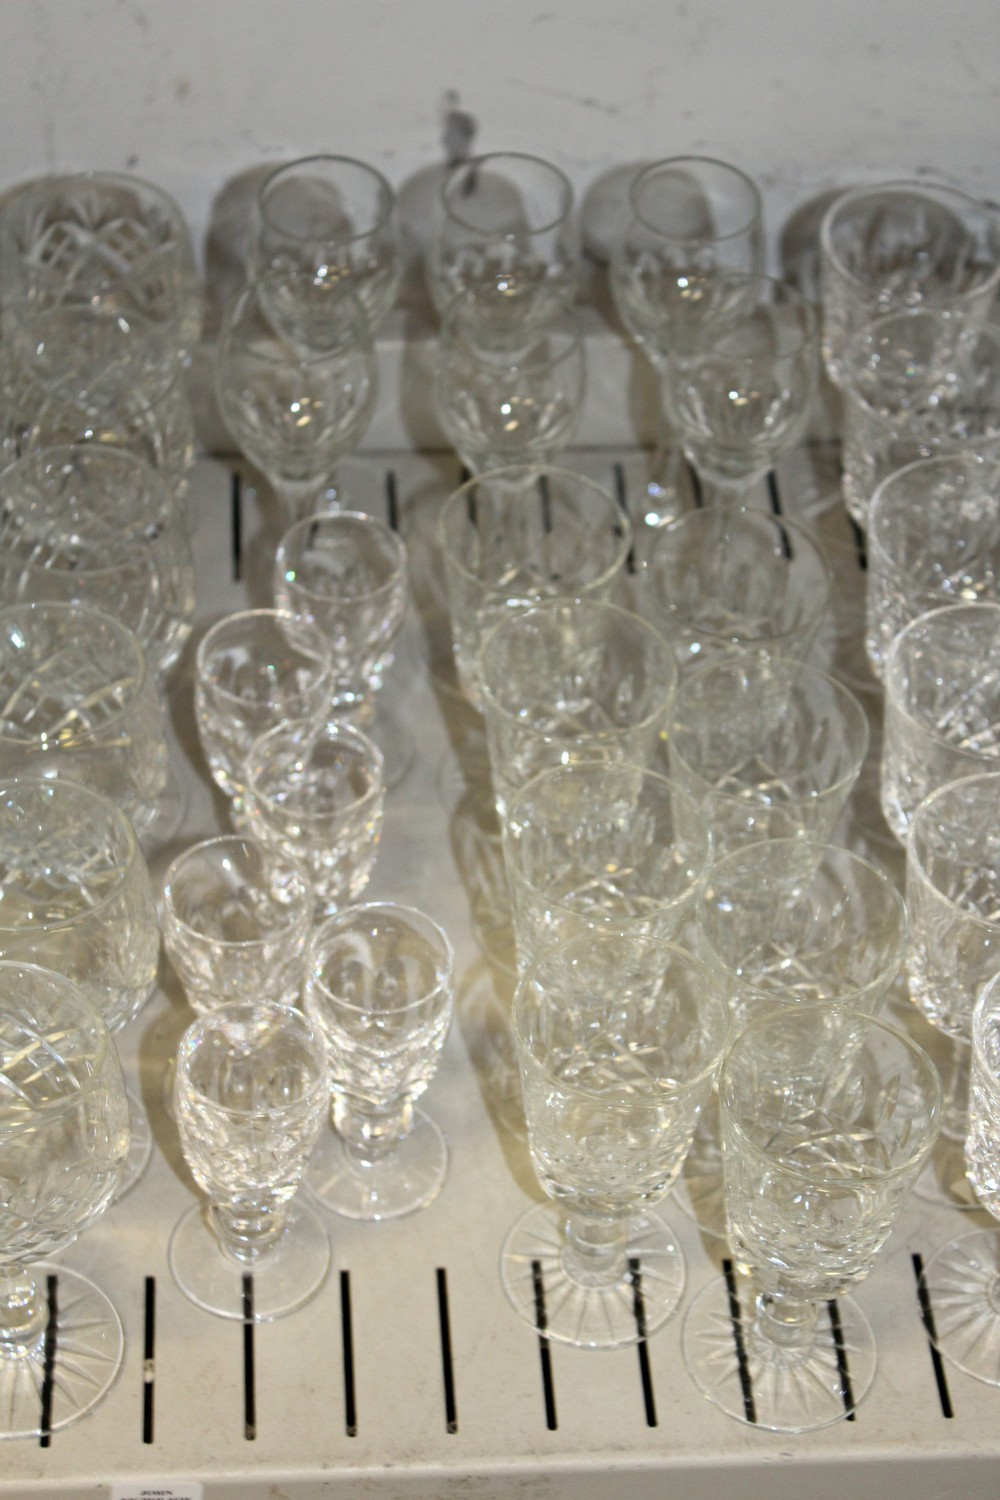 A shelf of cut glass drinking glasses. - Image 4 of 5